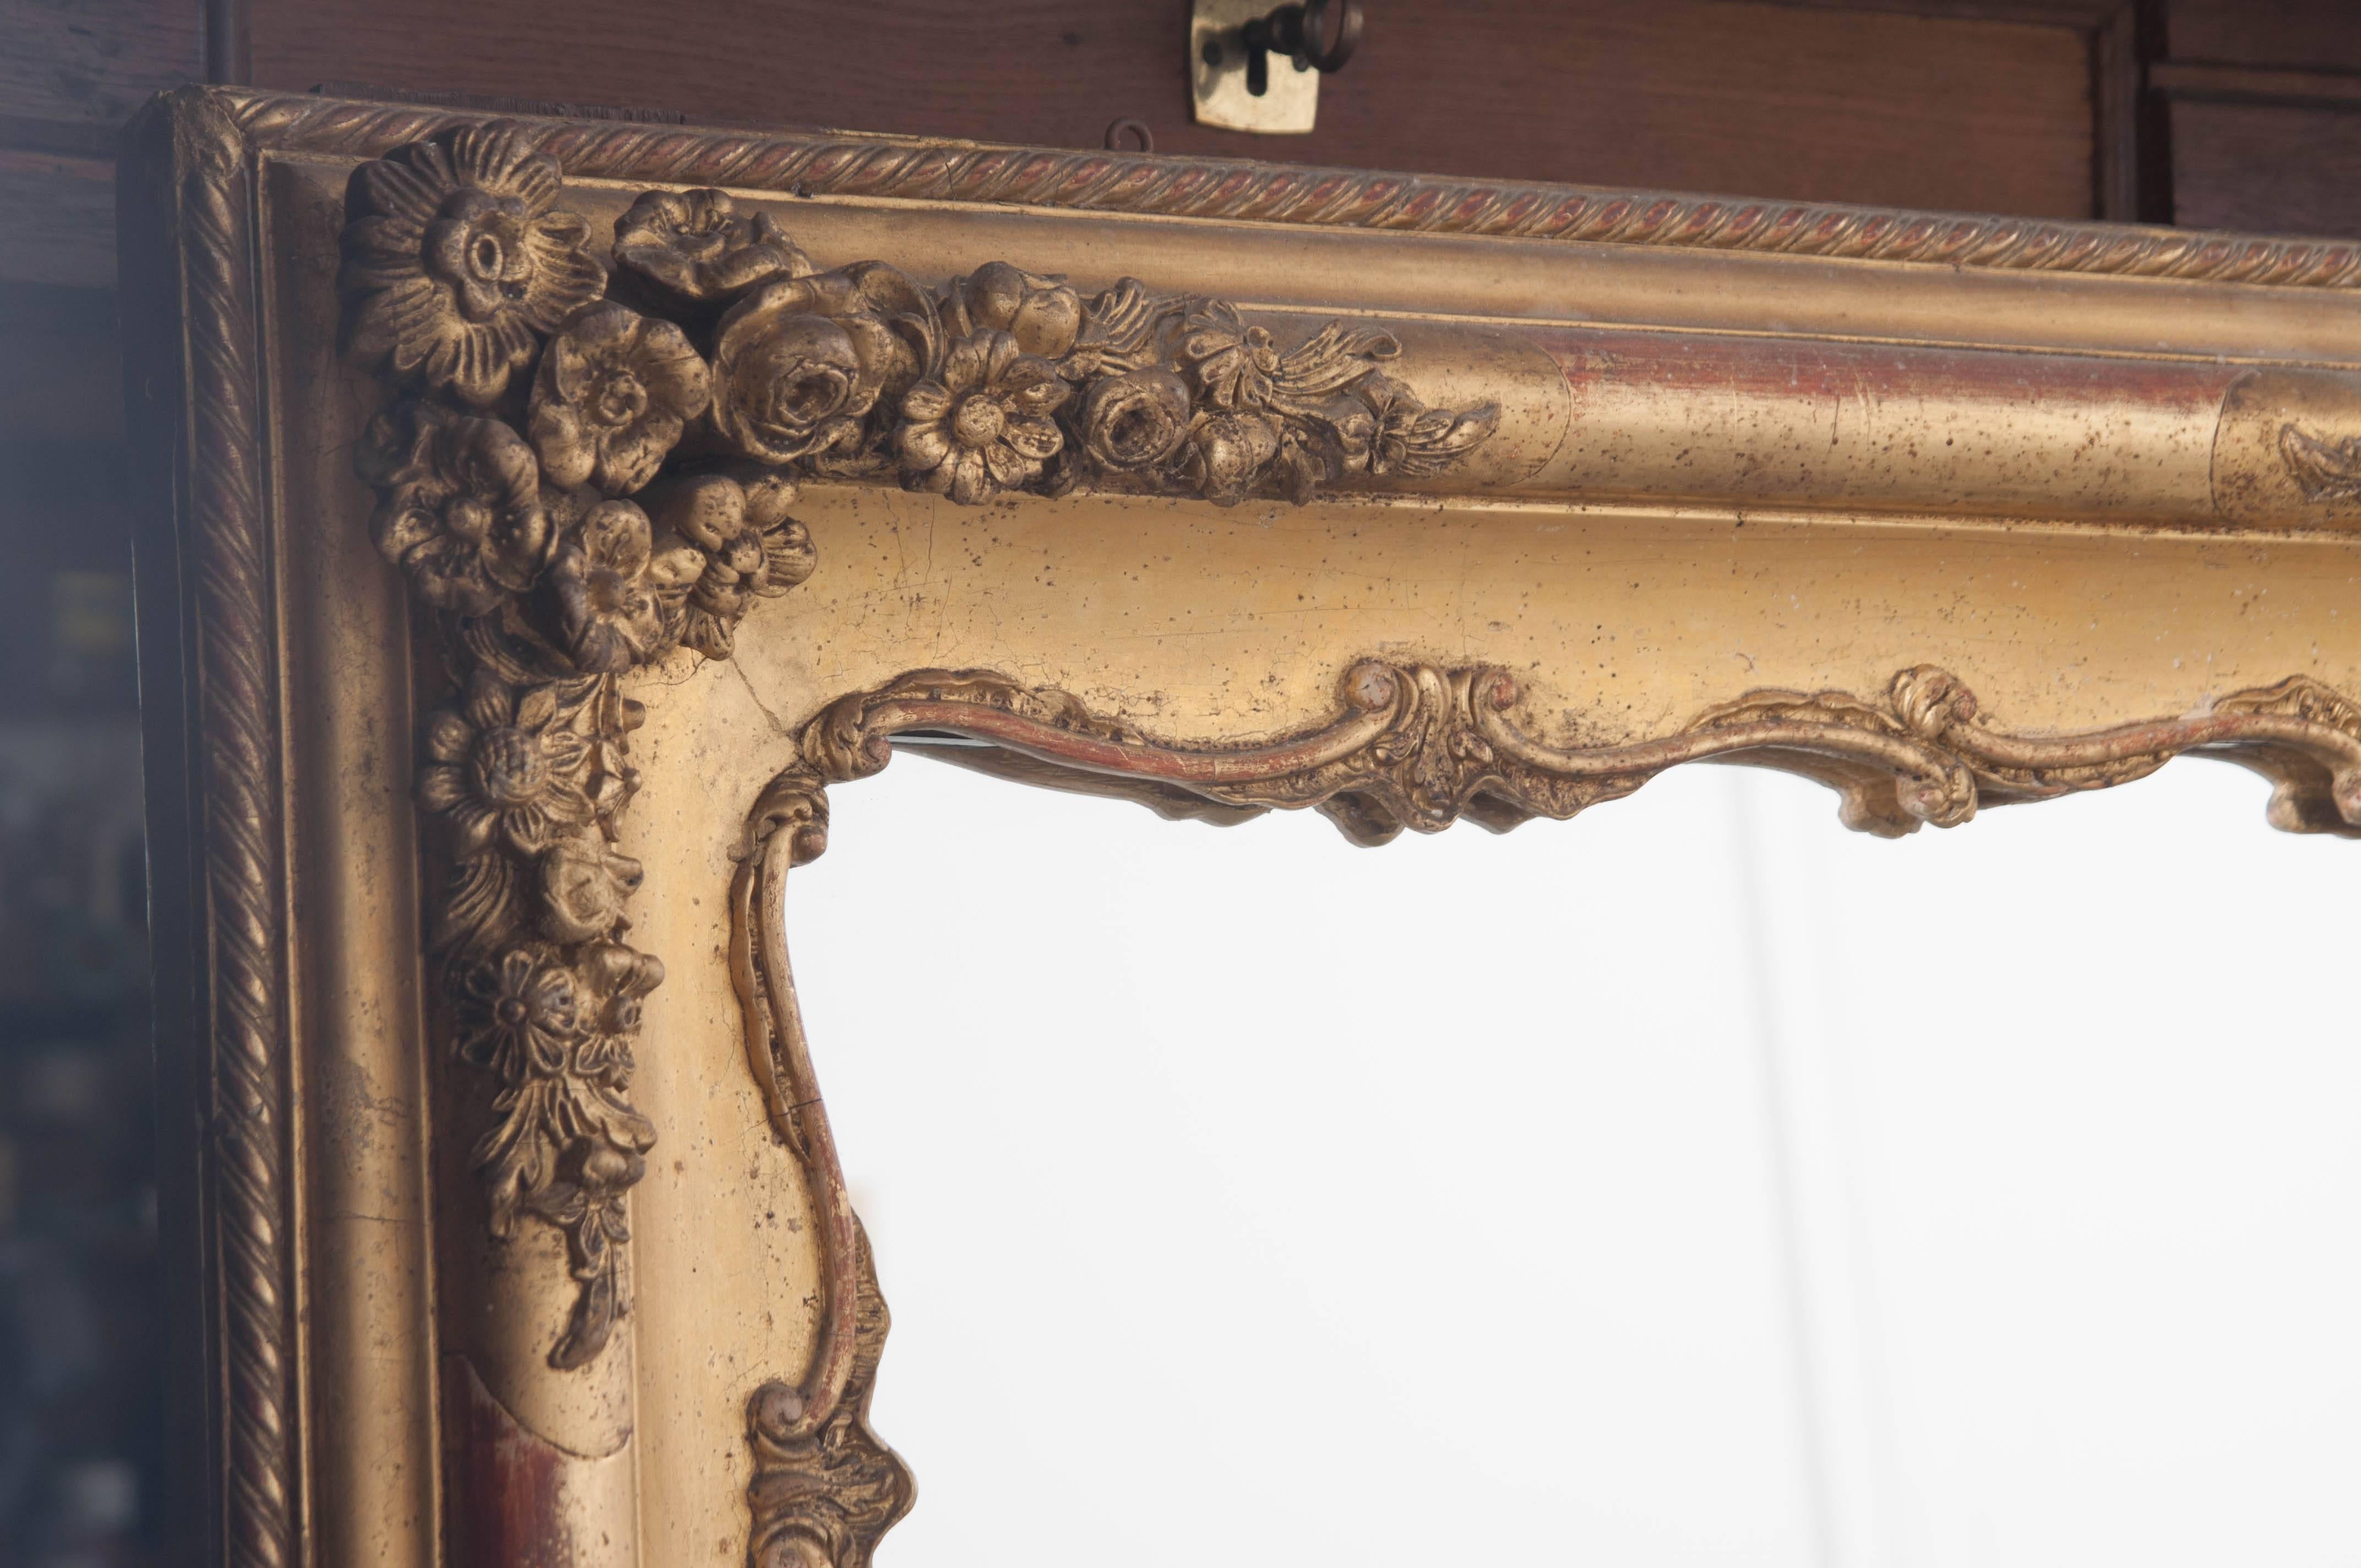 A marvelous mantel mirror, finished in beautiful gold gilt, from 19th century, France. This ornately decorated mirror boasts many design features. All four corners, sides and top are bedecked with intricate floral bouquets, from which leafy vines